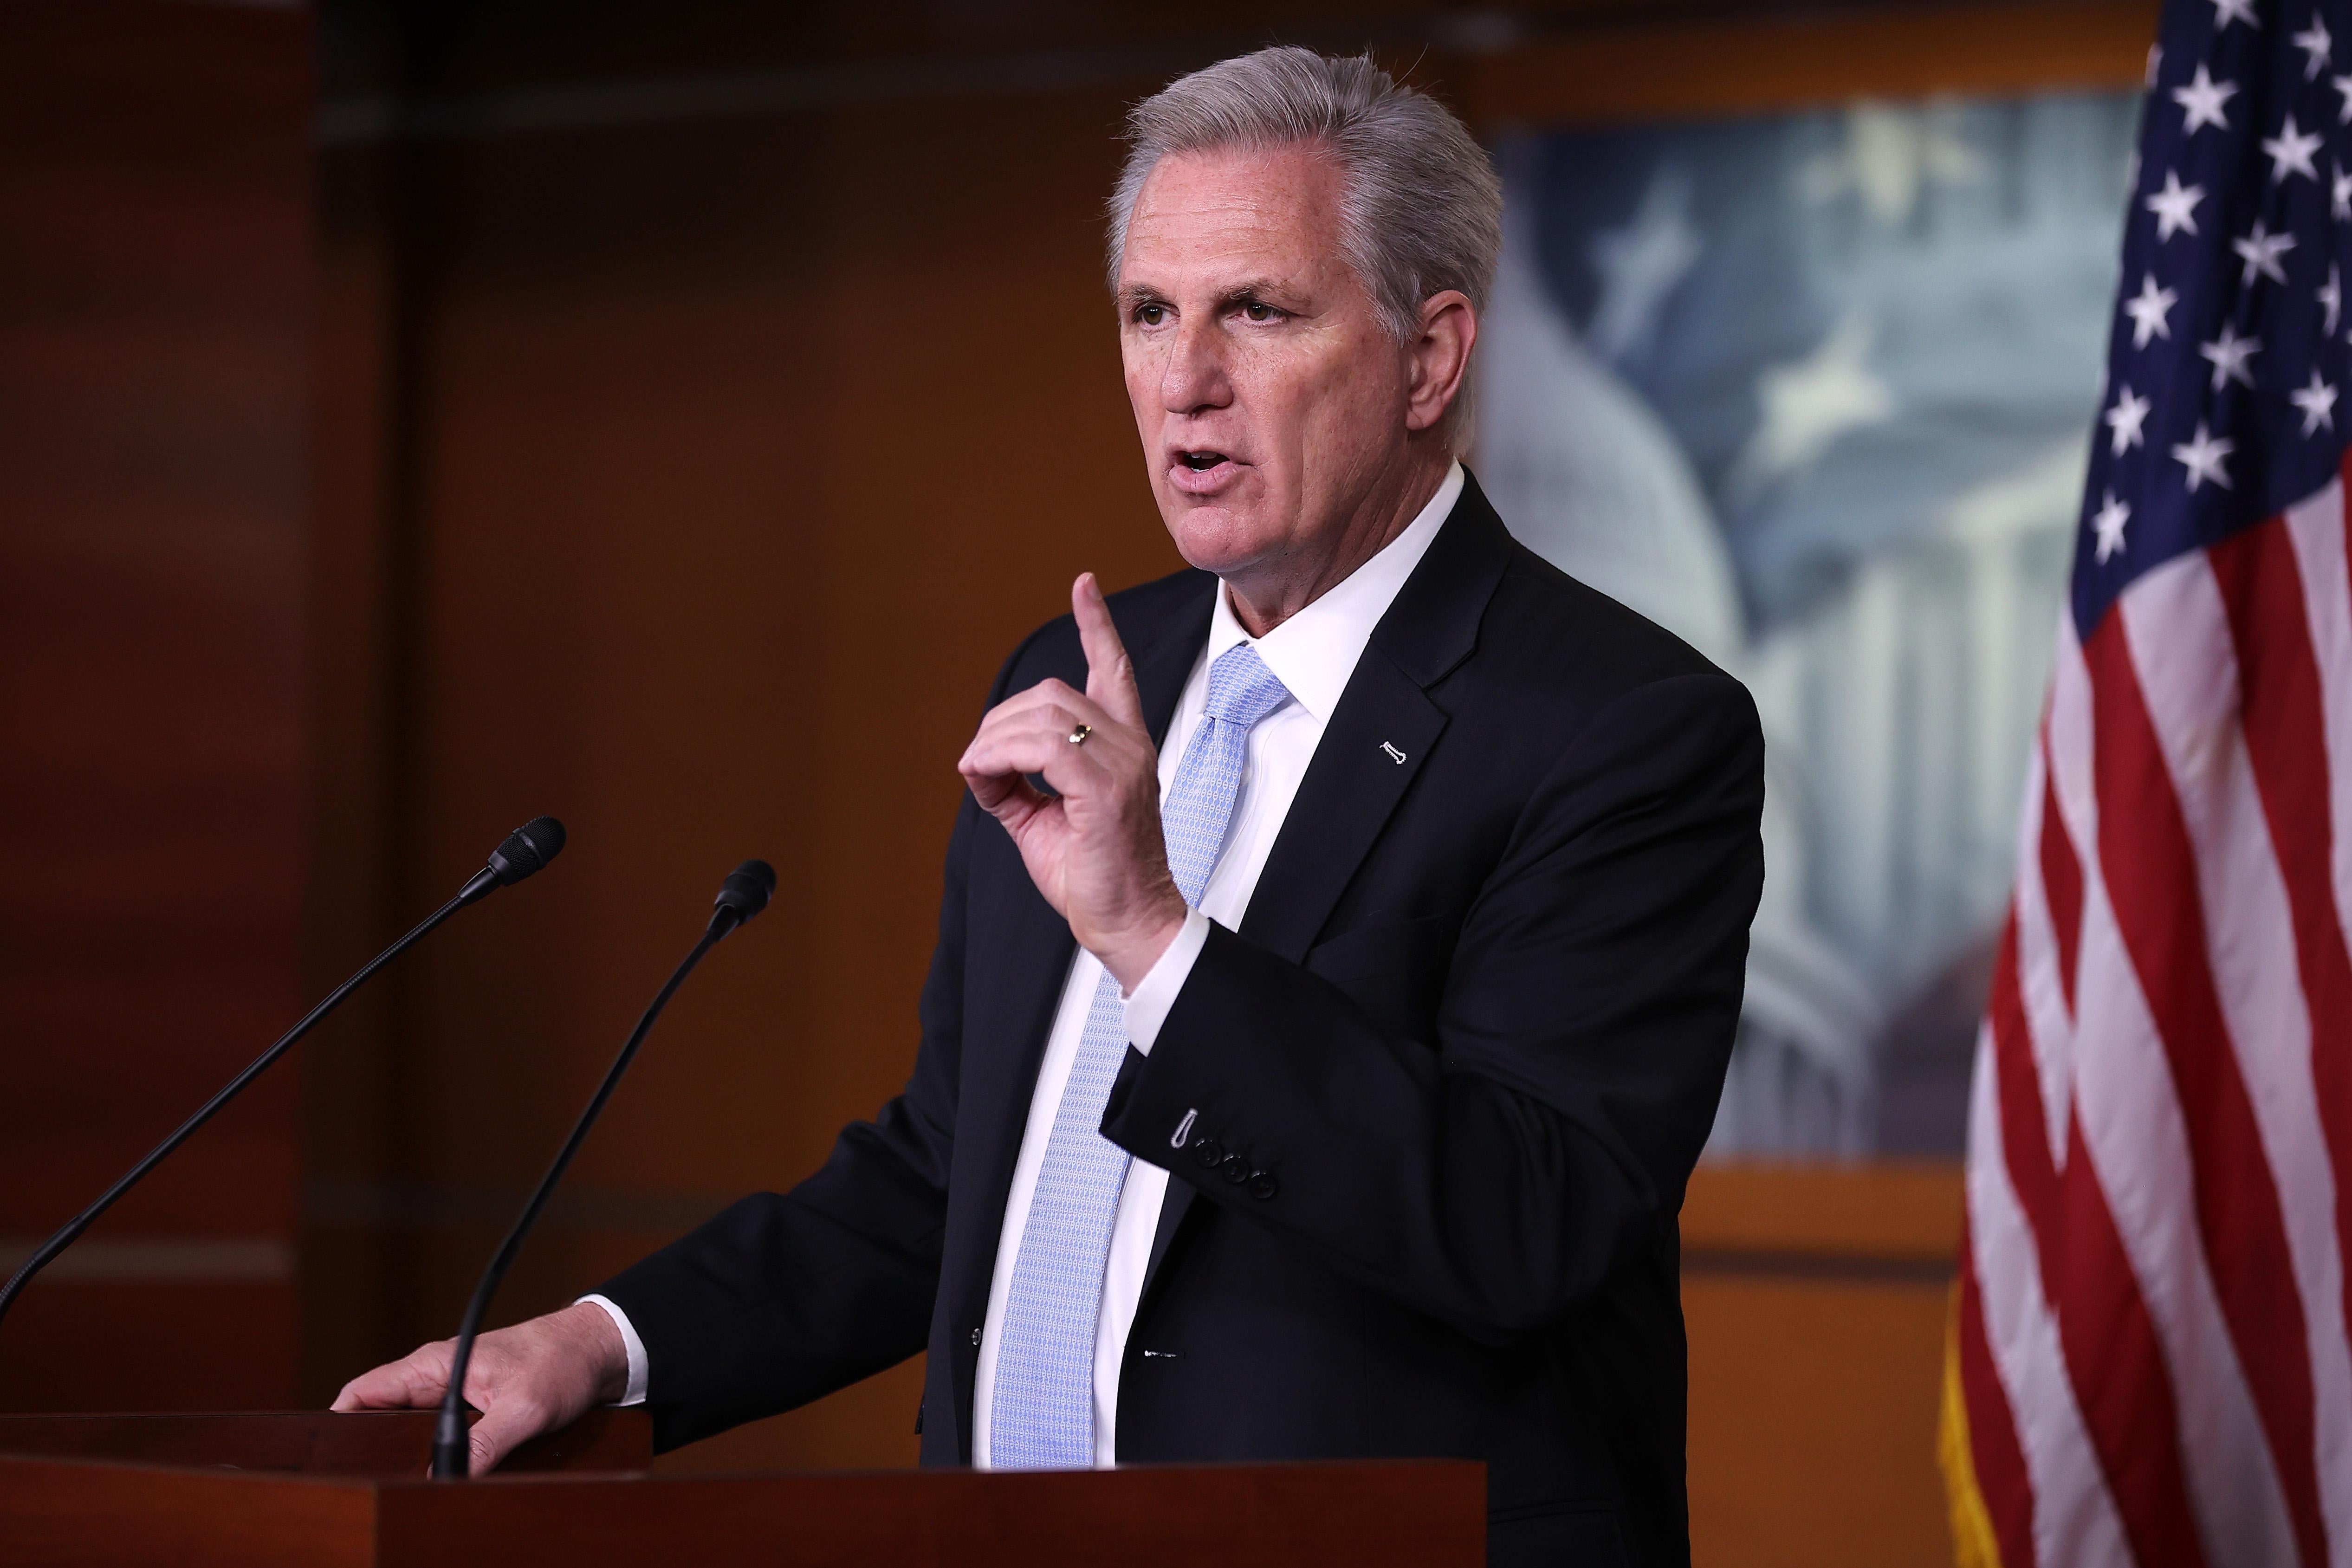 Kevin McCarthy making the gesture for "one" while speaking behind a mic